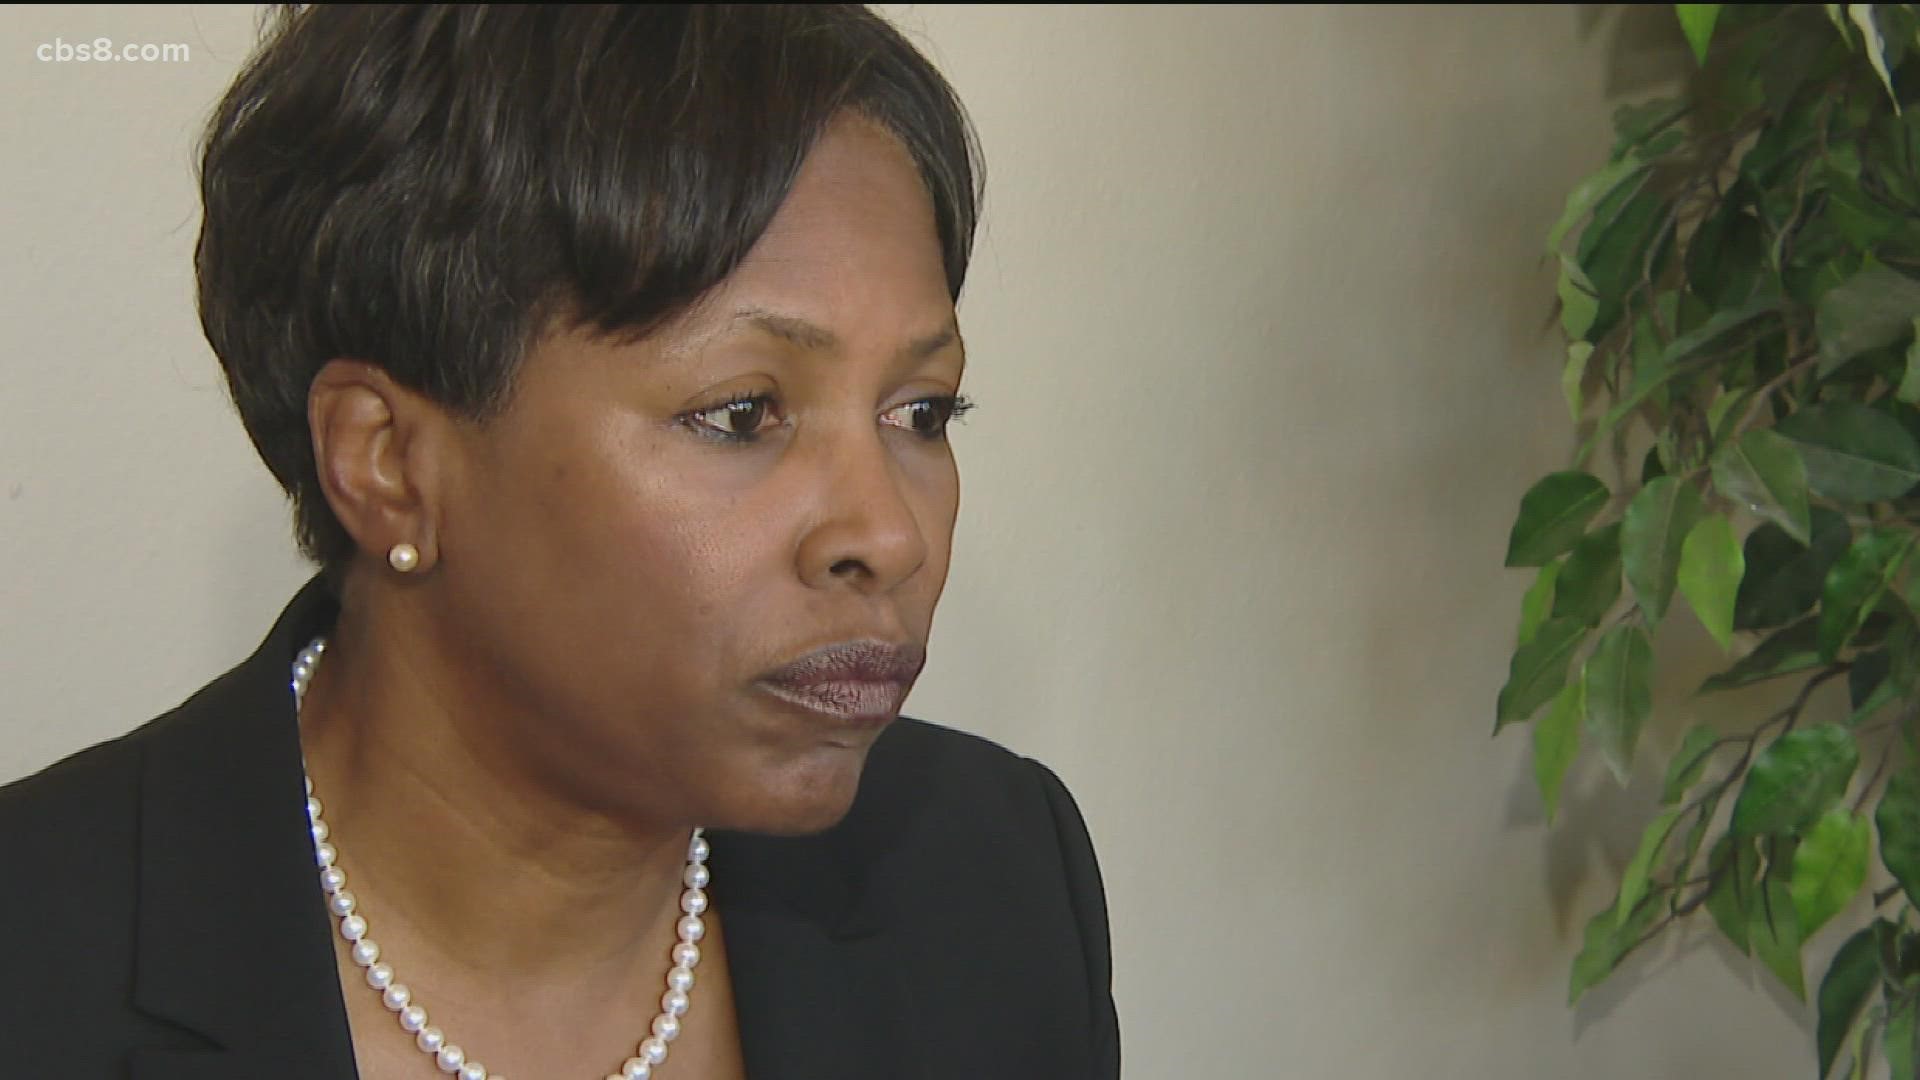 Dr. Cheryl James-Ward believes if she's terminated, it's retaliation against her and she plans to file a lawsuit.